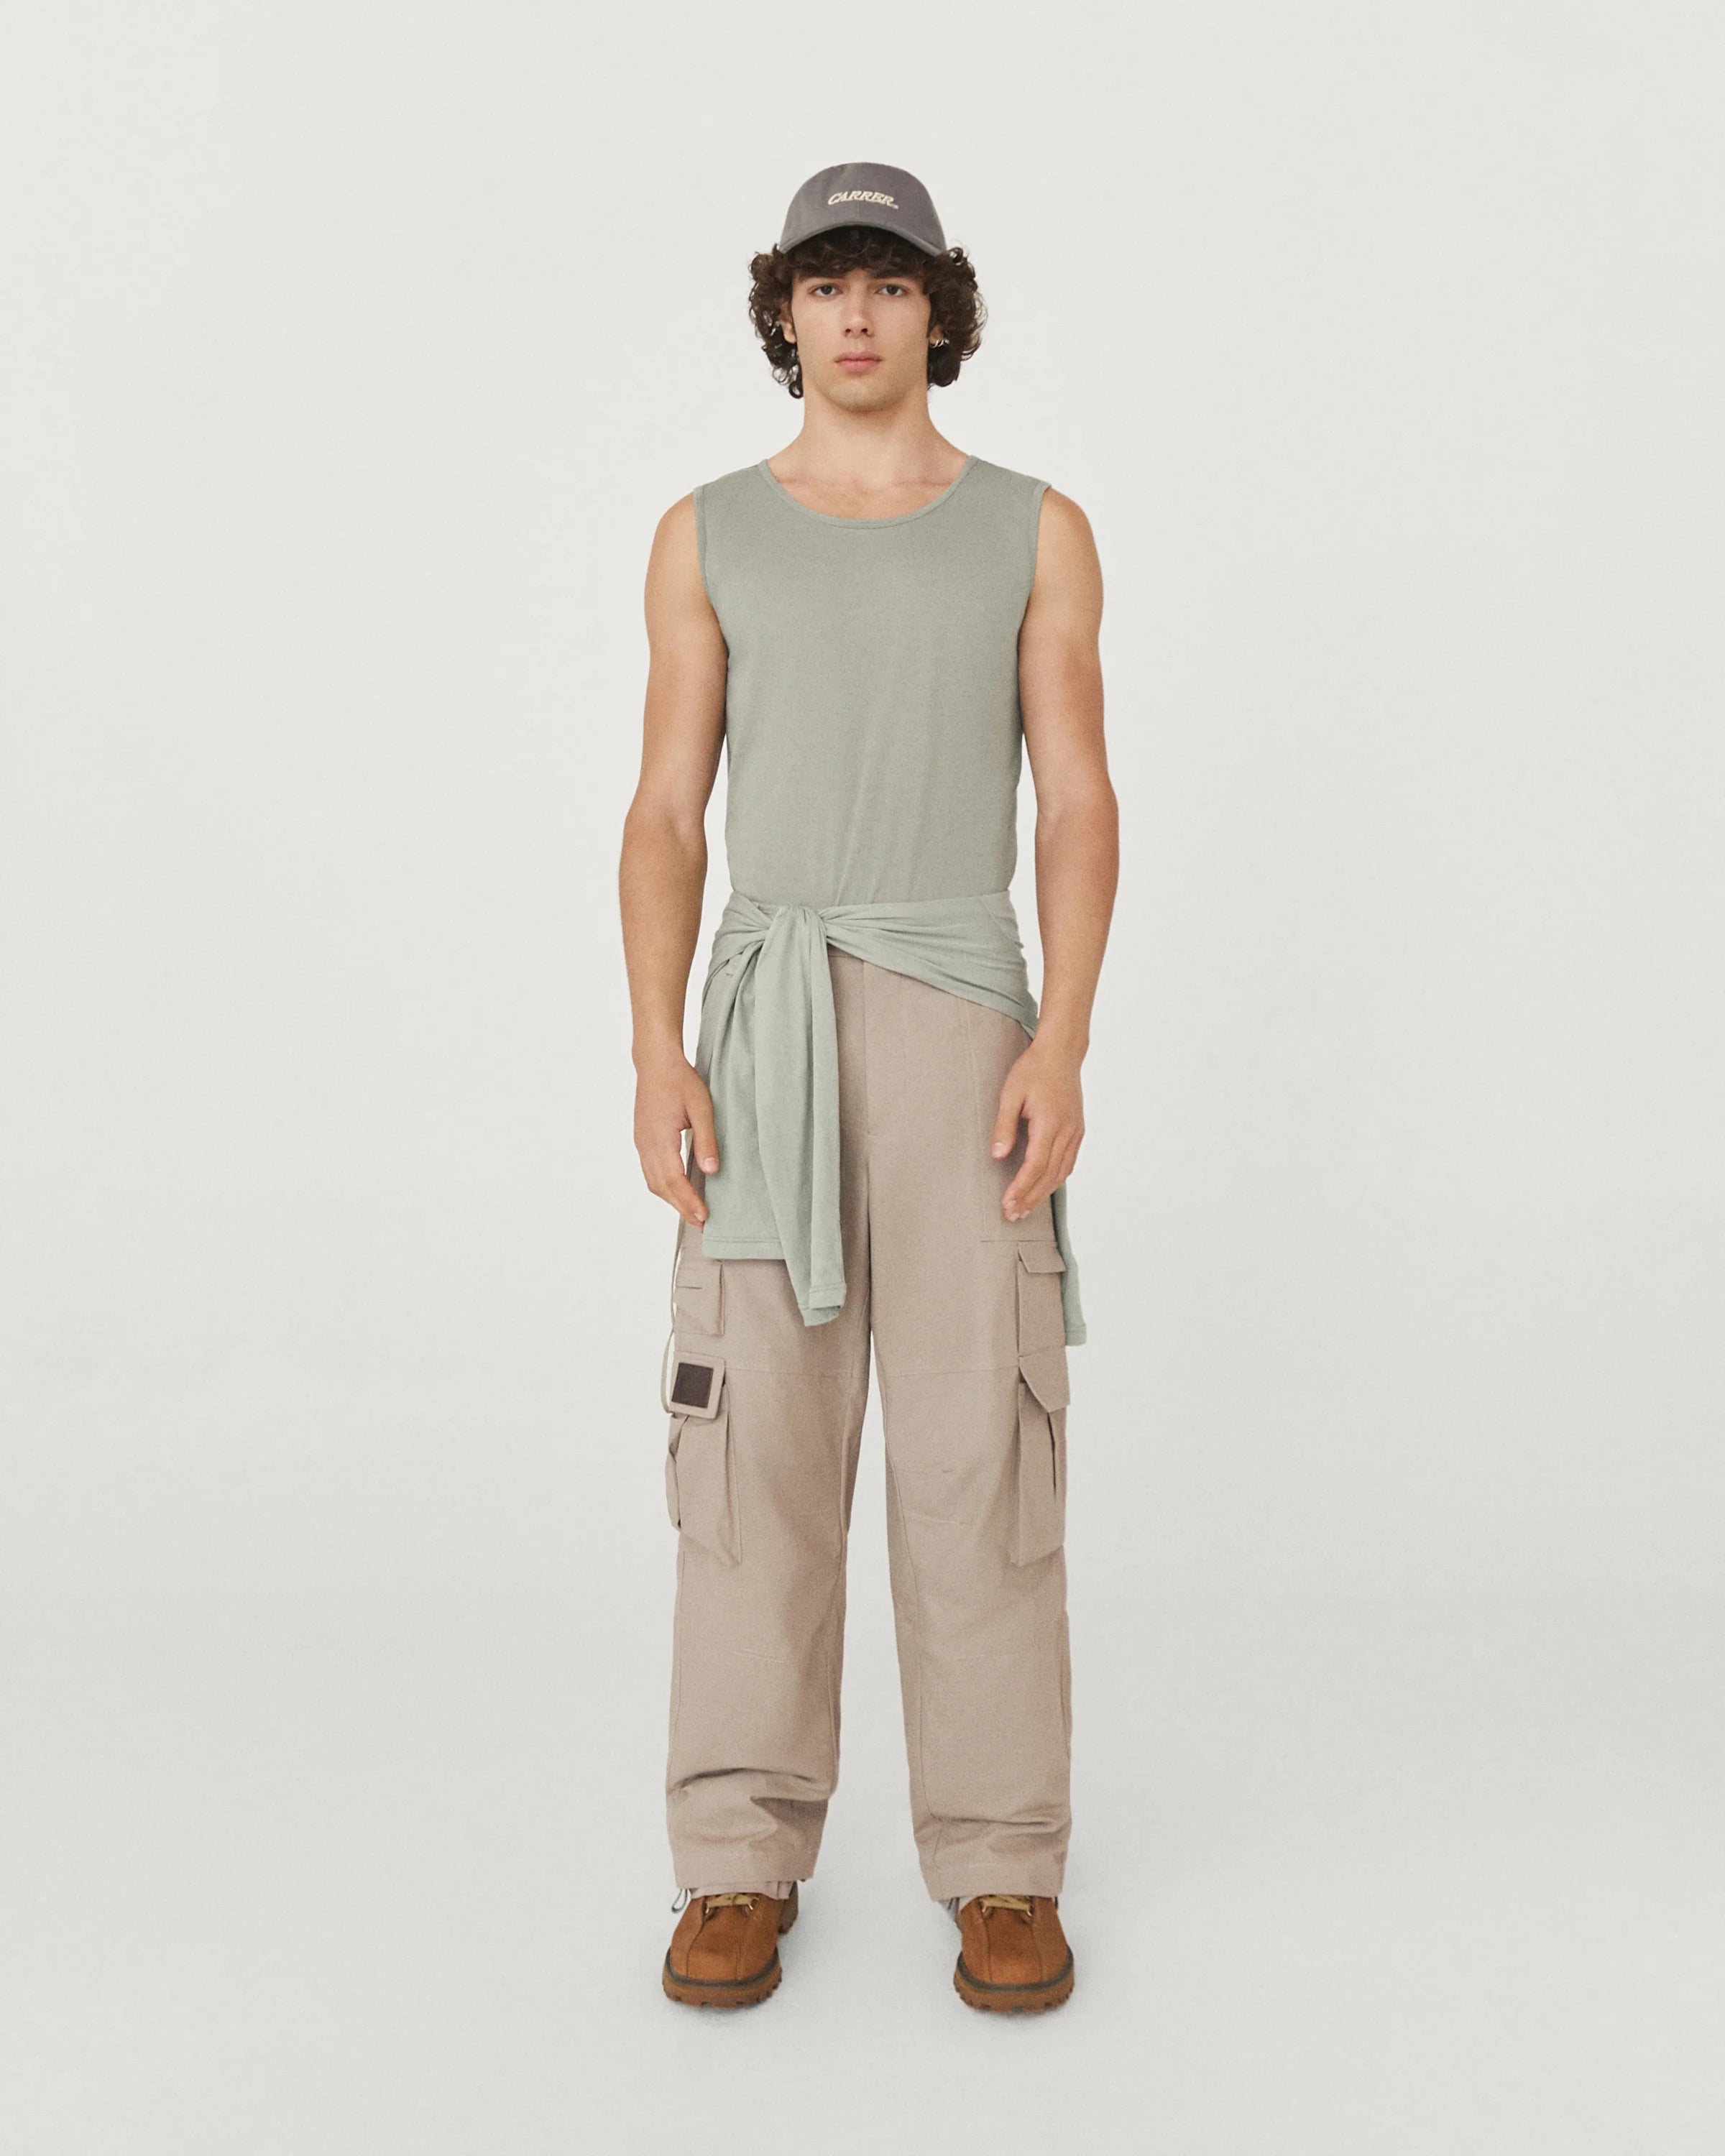 Carrer Doria Double Layer T-Shirt in Mint Gray